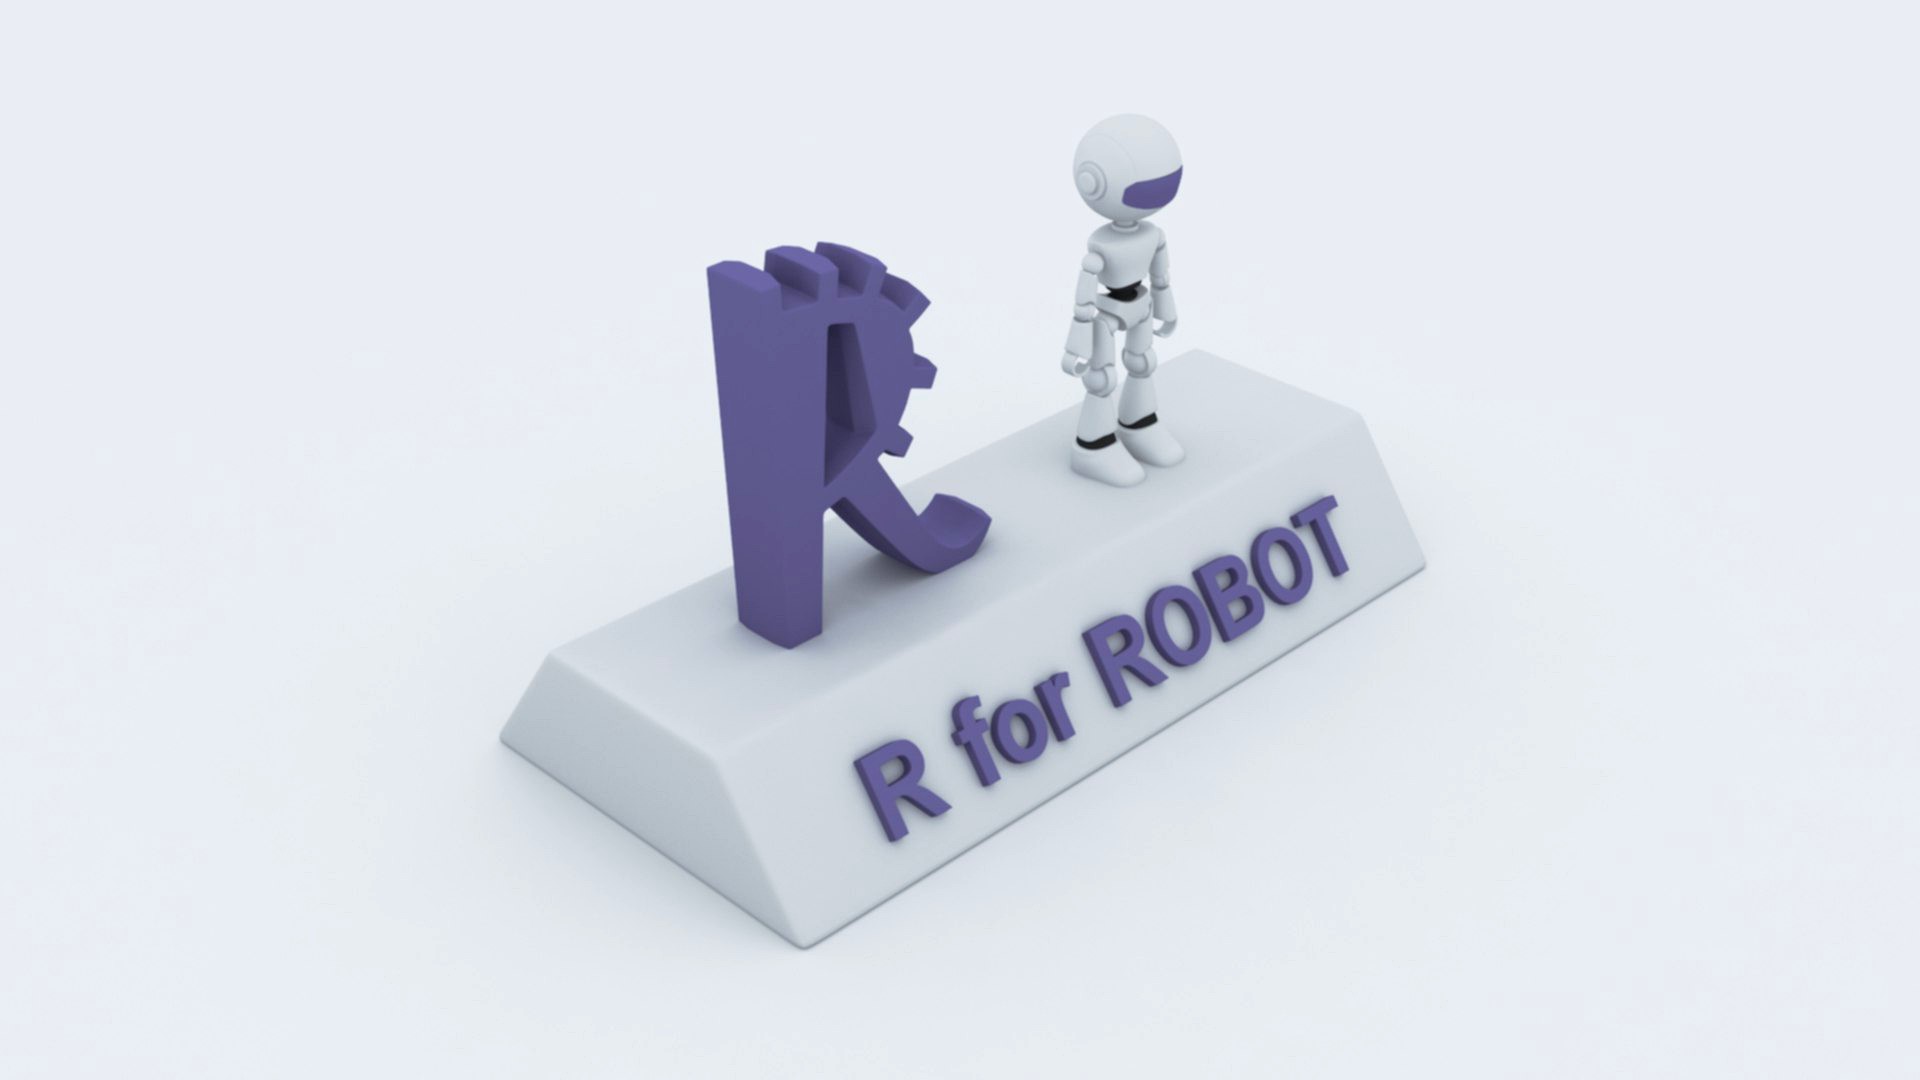 R for ROBOT